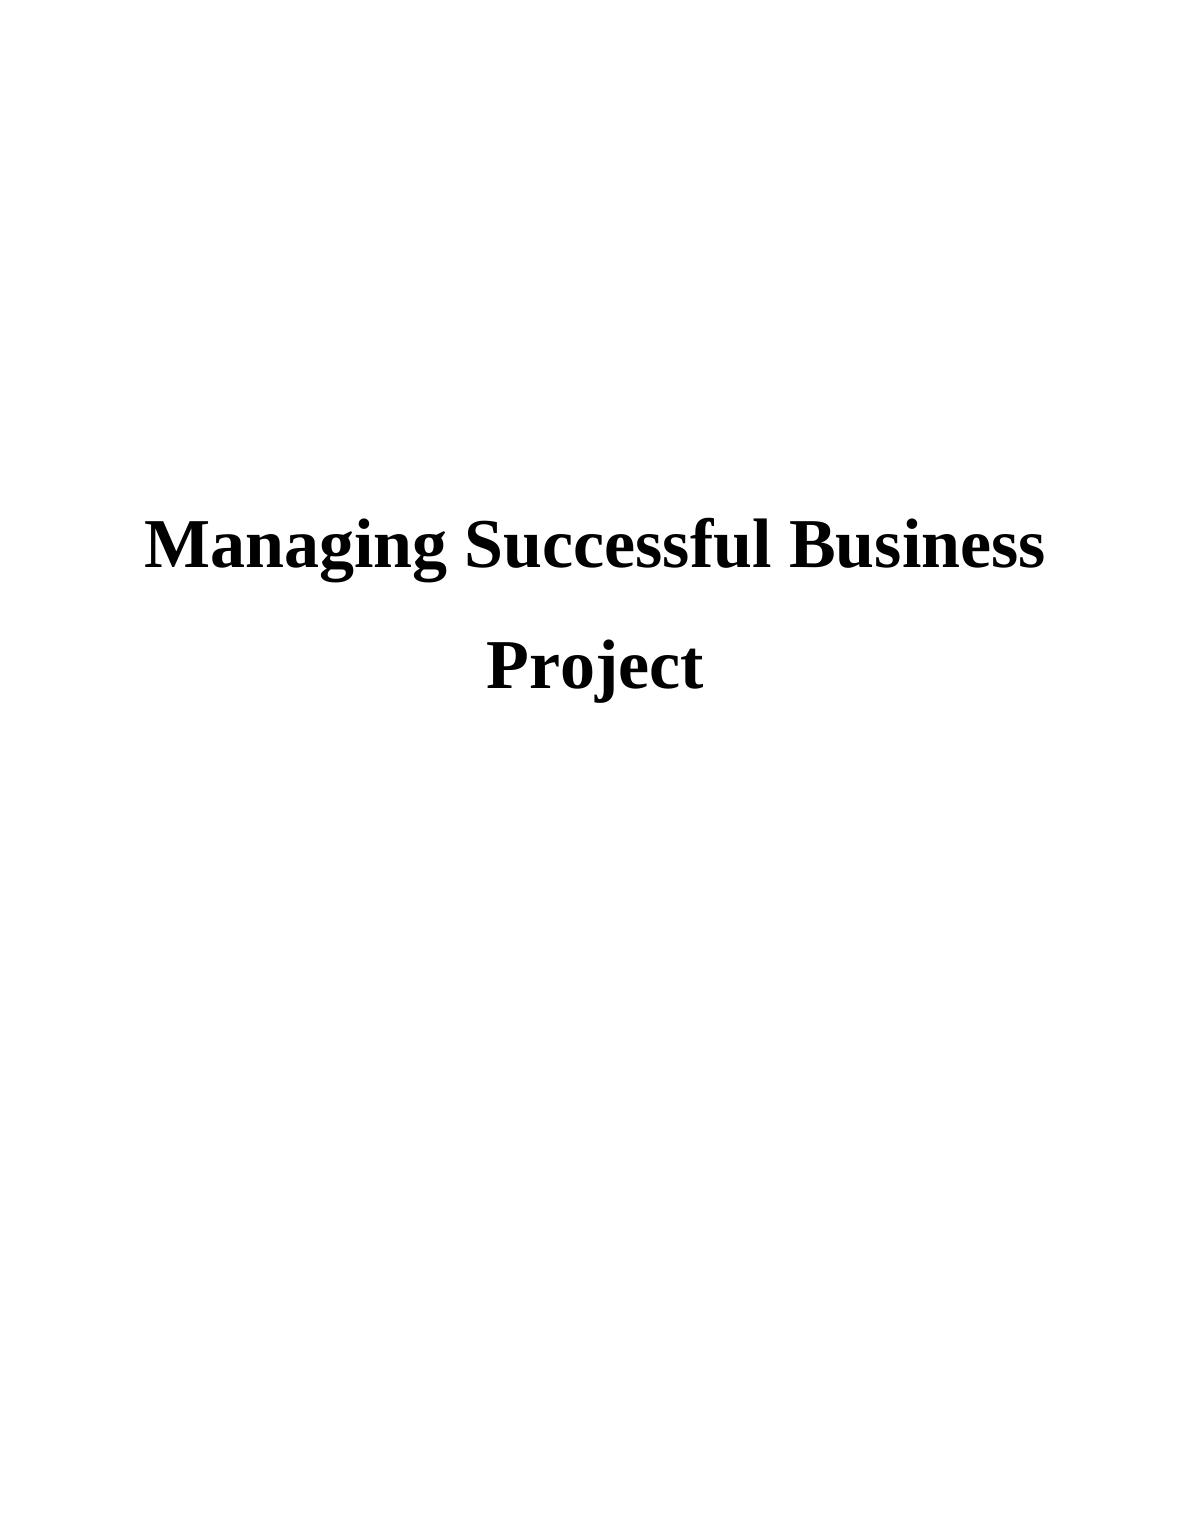 Managing a Successful Business Projects Assignment_1